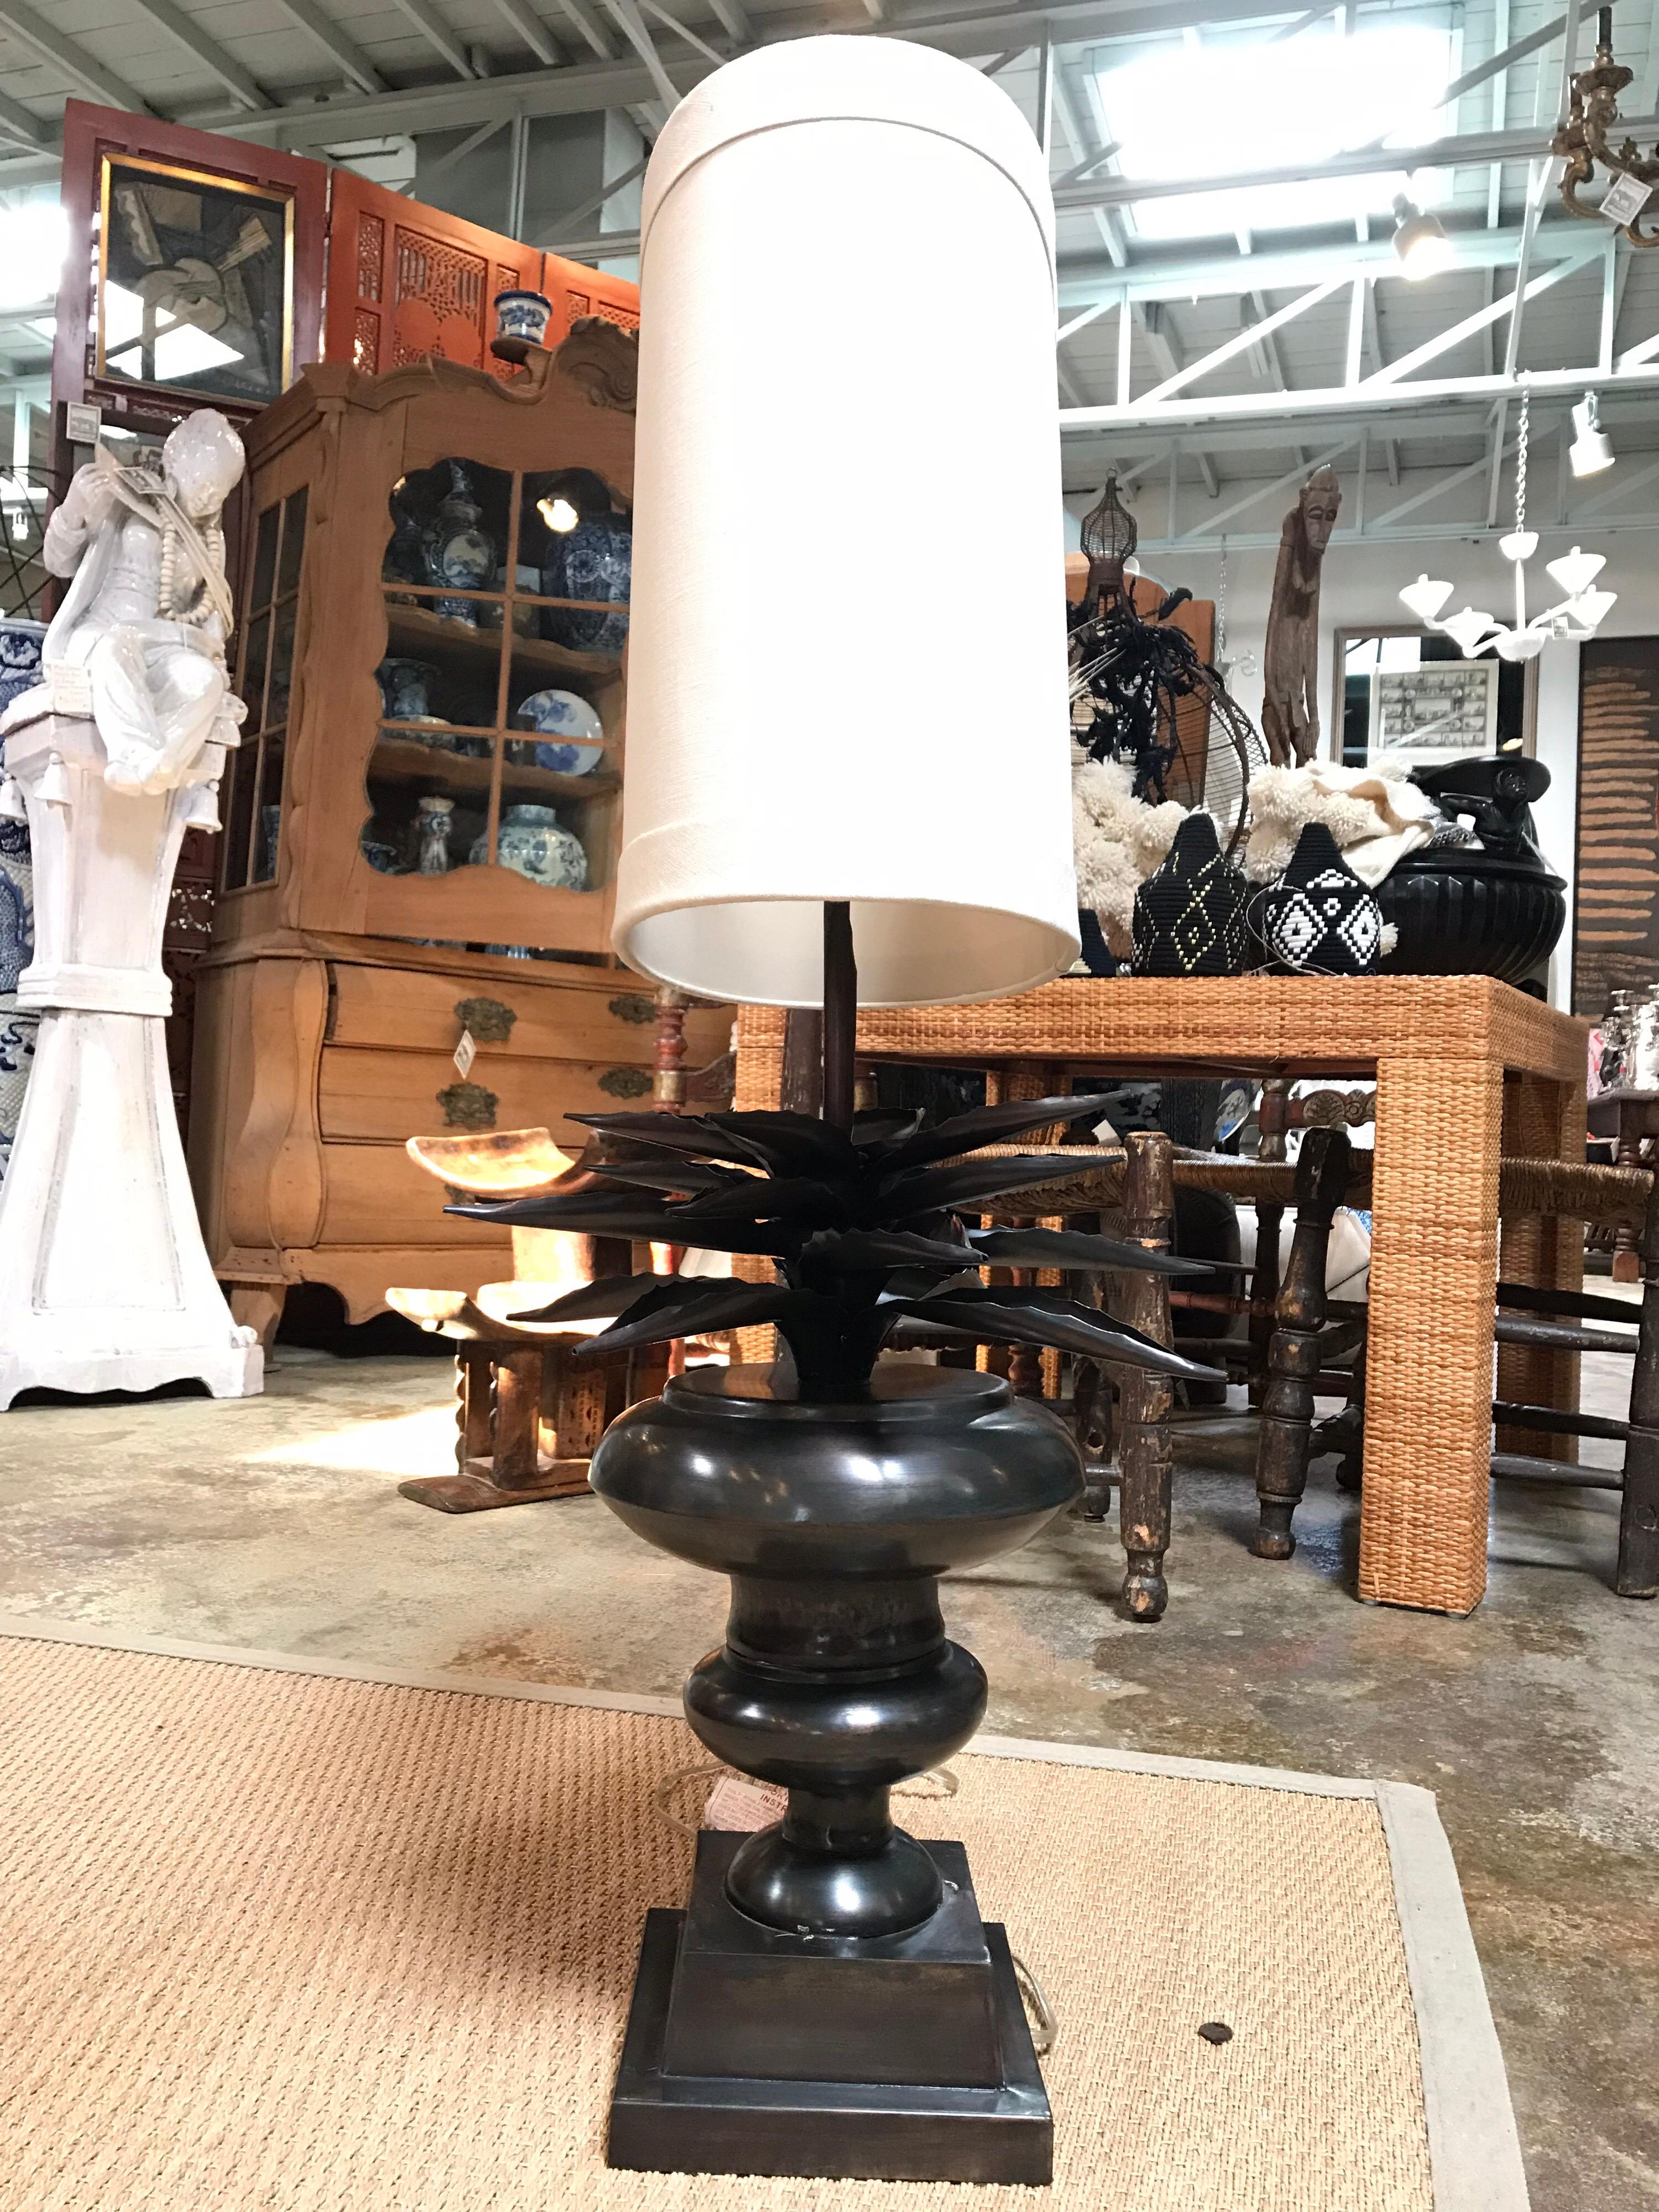 This hollow, metal cast lamp has decorative handmade layered Agave leaves fanning out around the lamp in a radial pattern. They are perched atop the lamp body and base. This item comes with a harp, an oblong shade and a matching topper.